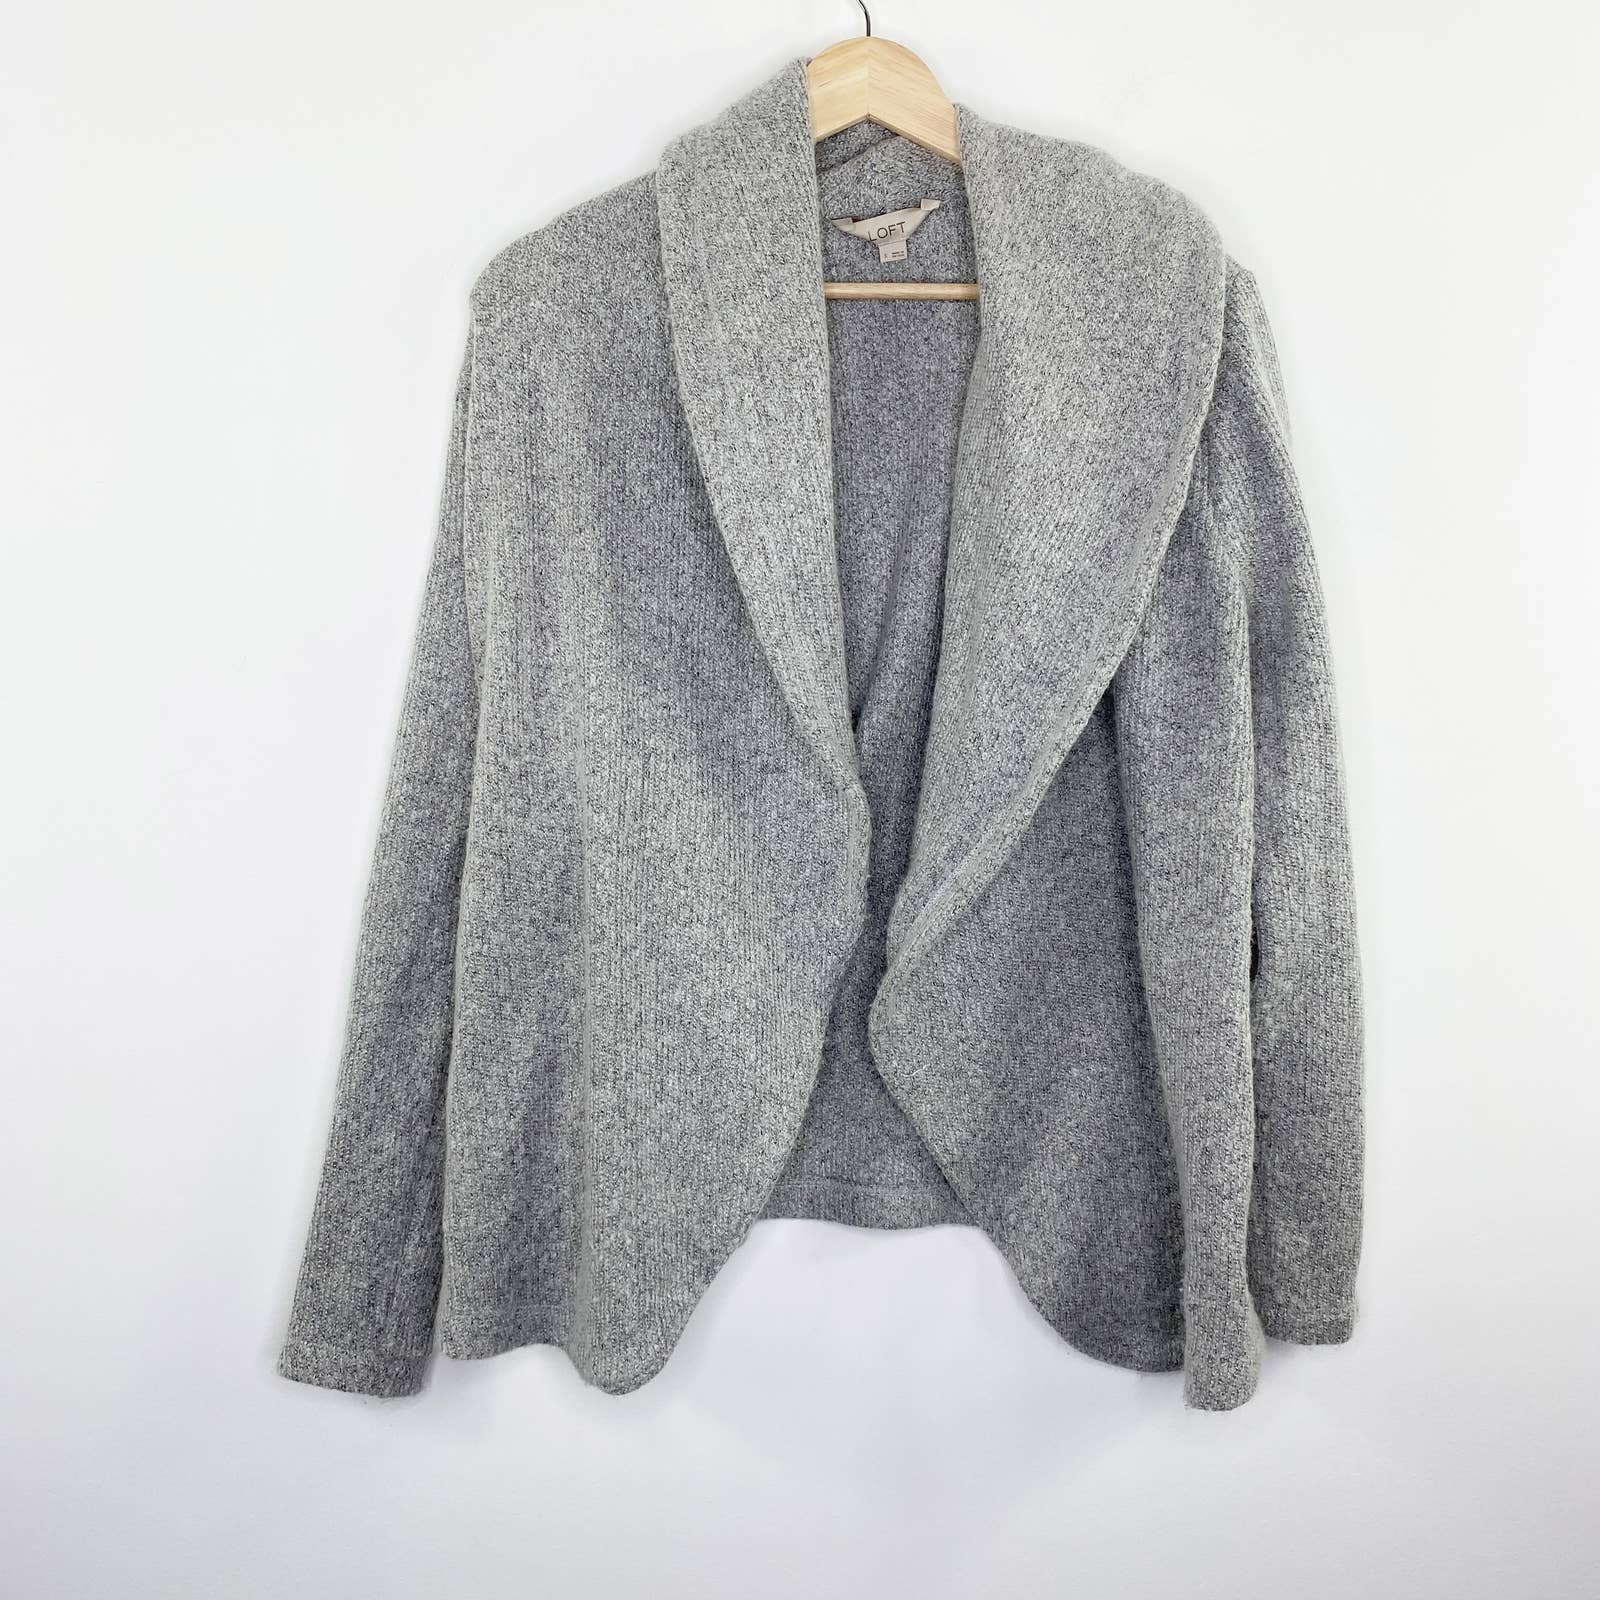 High quality Loft Gray Open Front Knit Cardigan Sweater Womens Size Small S IxTmfIF6q online store